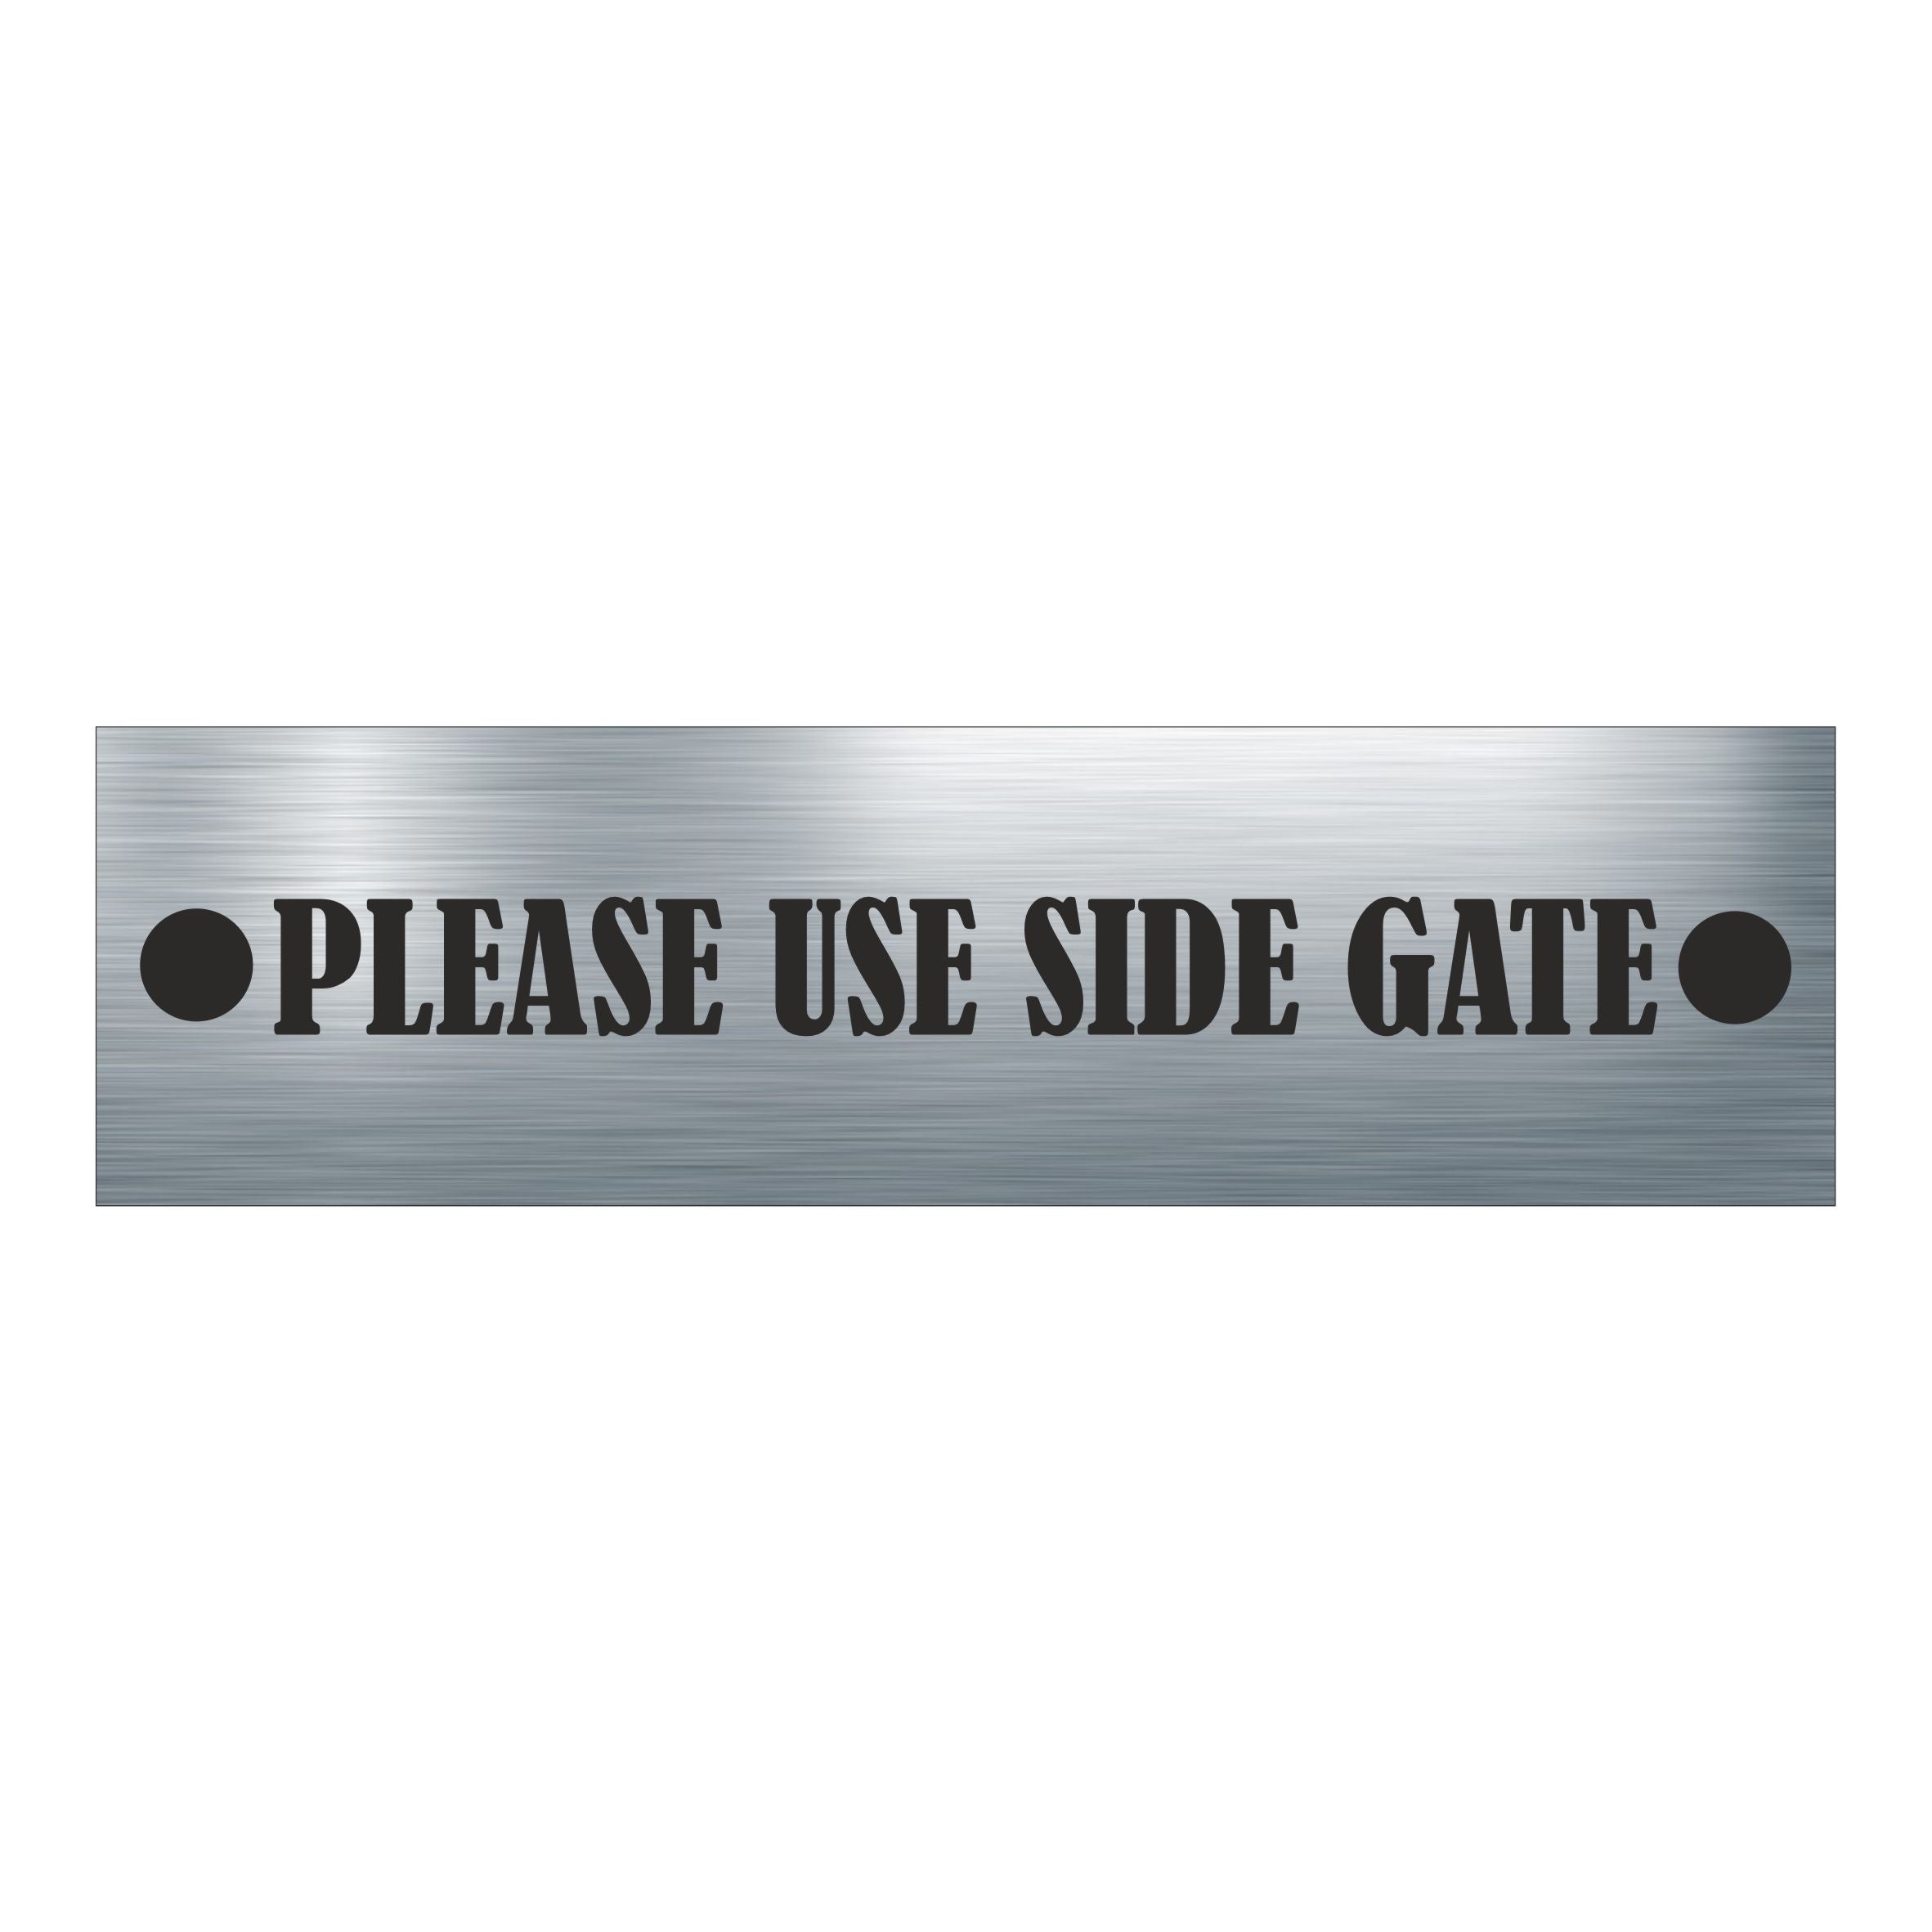 ANY TEXT - Aluminium Sign Personalised With Your Text - Example PLEASE USE SIDE GATE ( 5.5cm x 20cm )